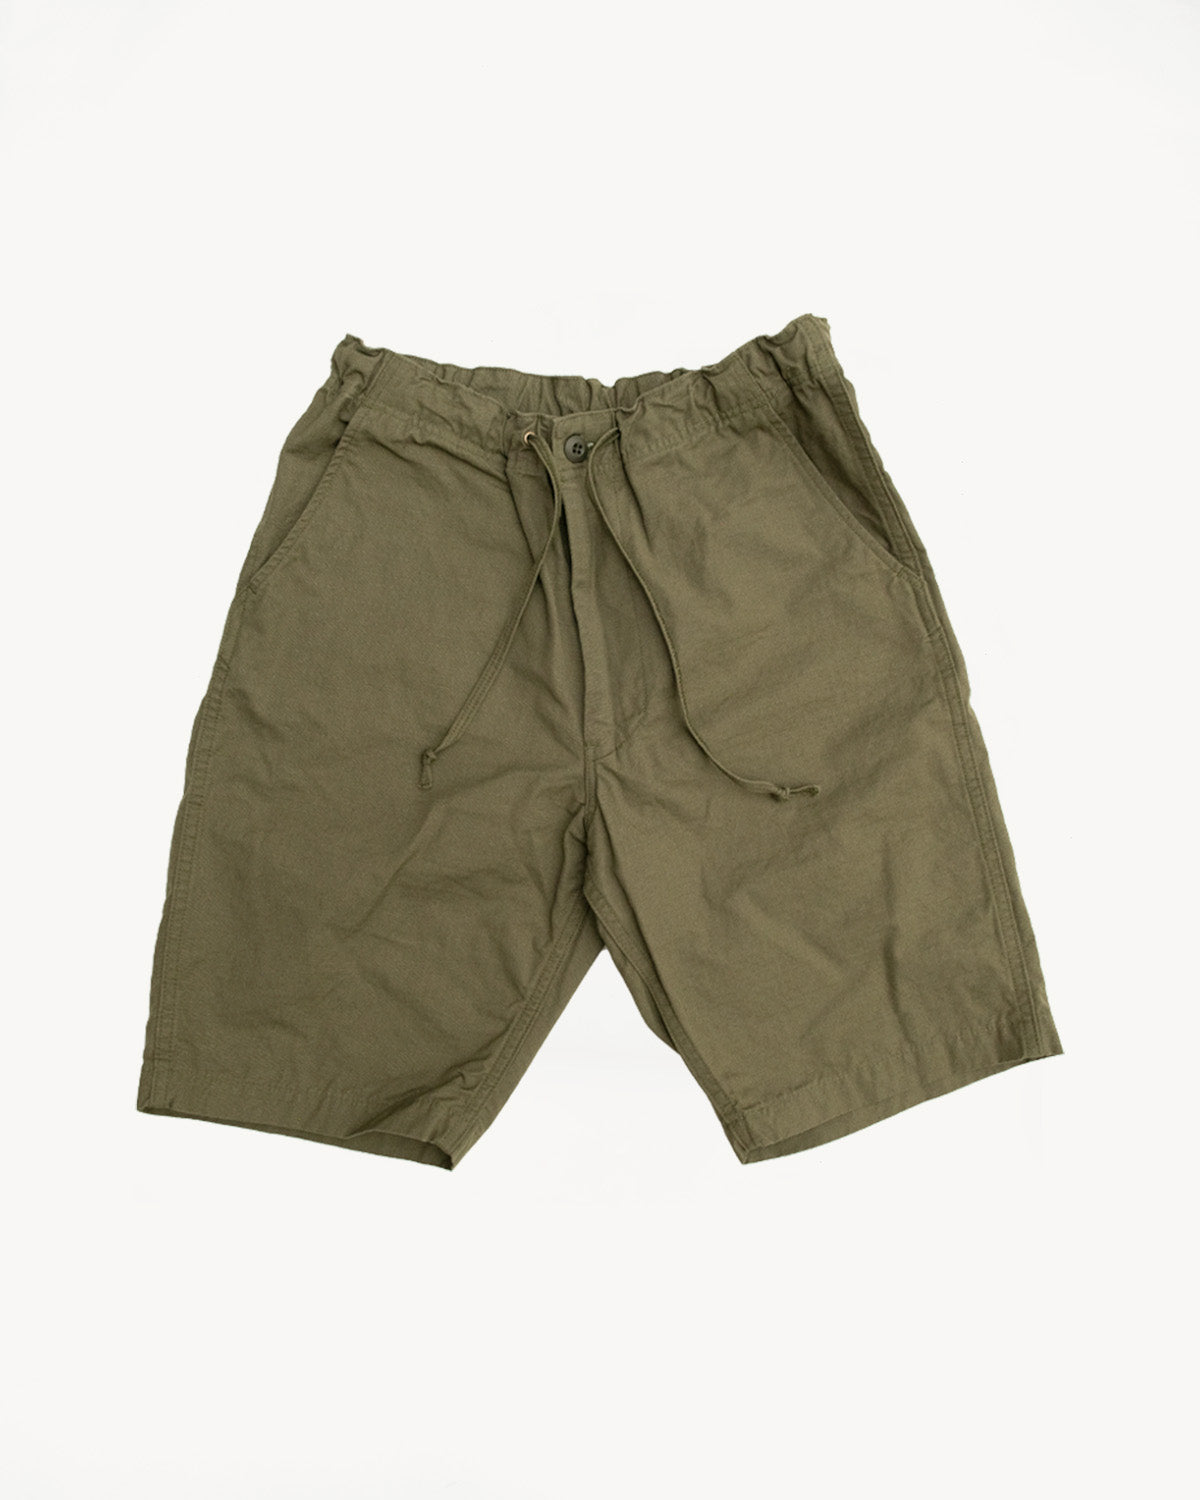 03-7022-76 - New Yorker Shorts - Army Ripstop | James Dant